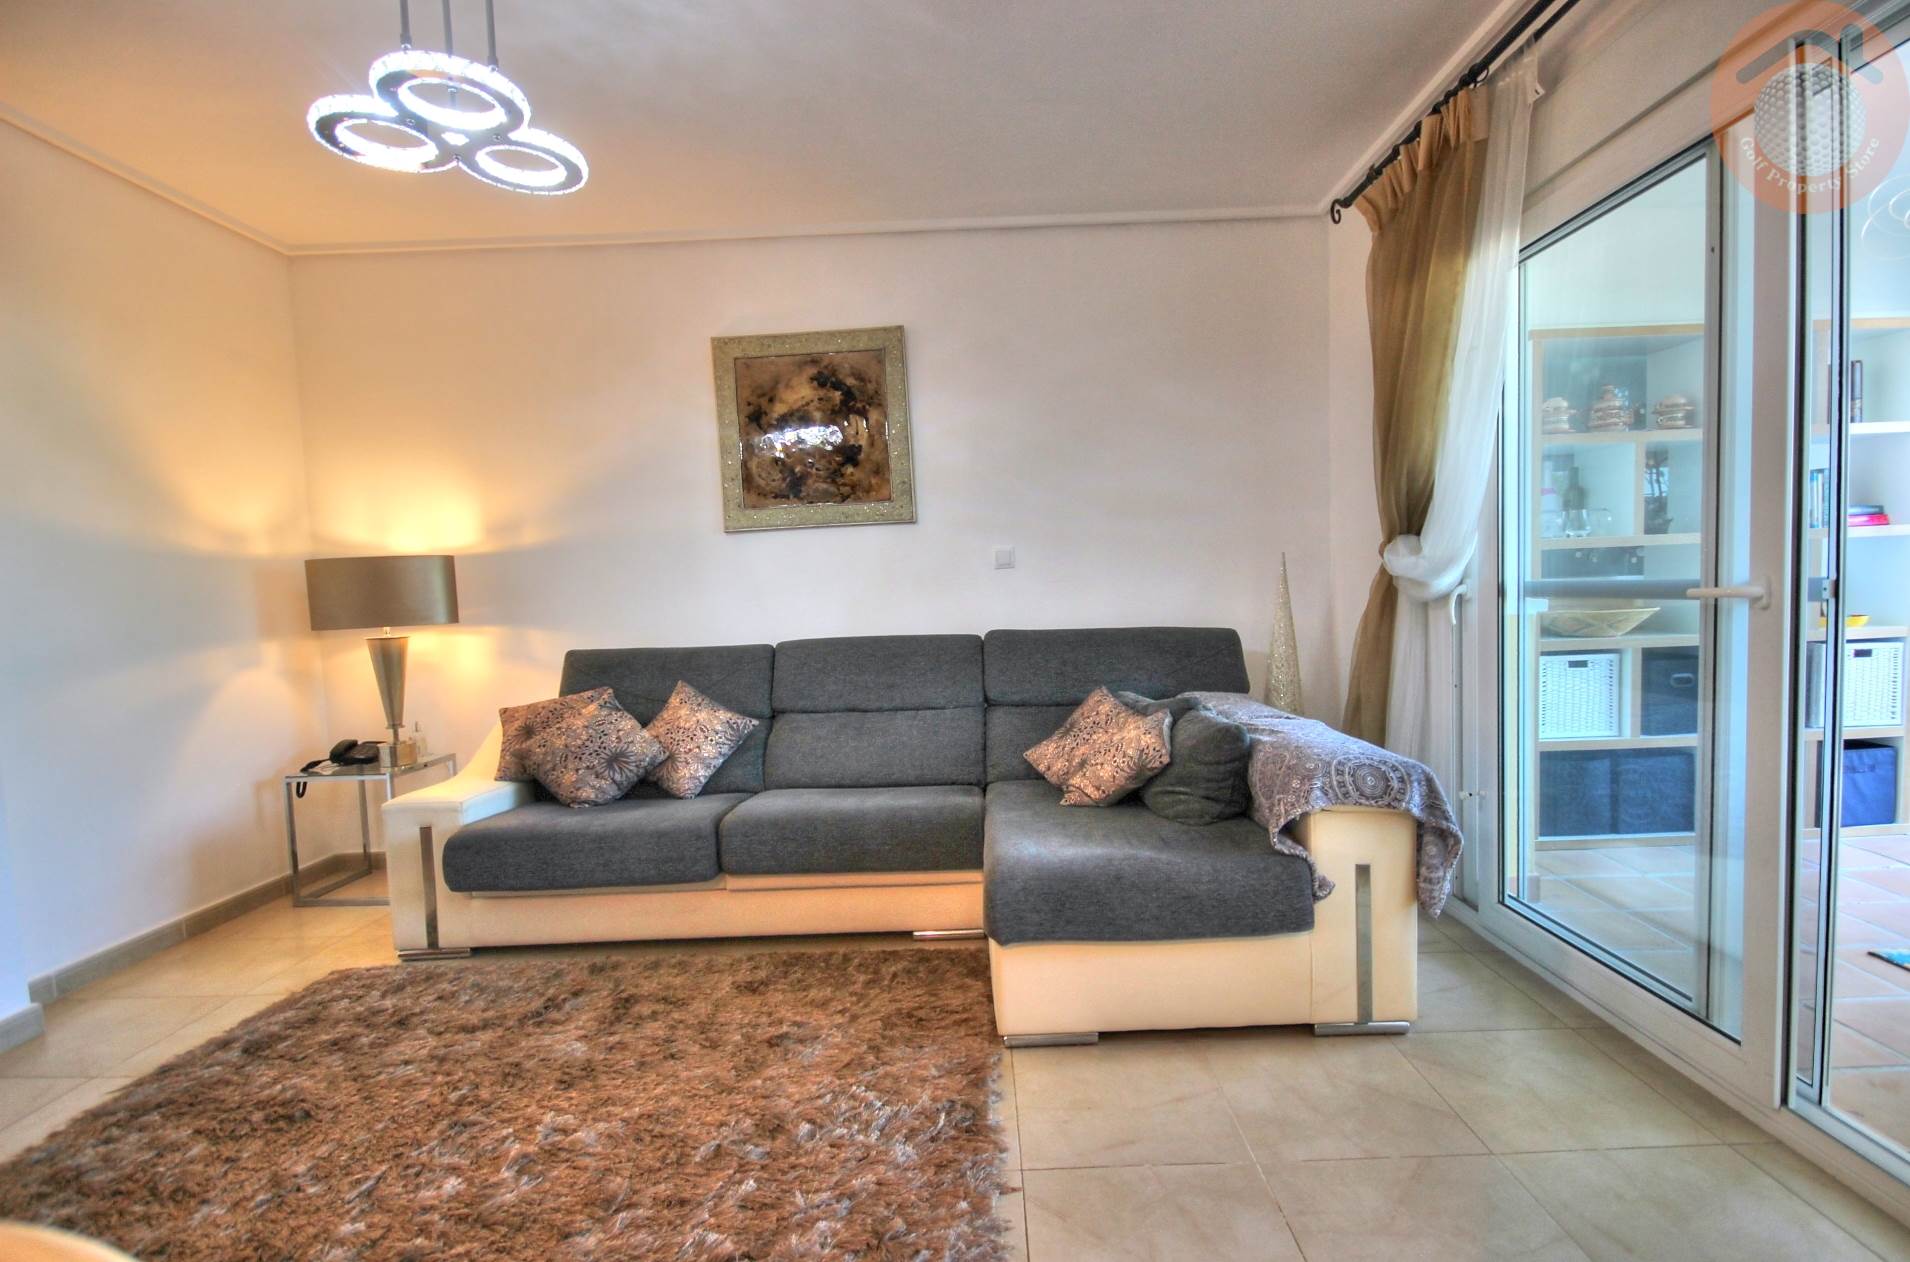 LA TORRE GOLF RESORT 2 BED TOWNHOUSE WITH JACUZZI AND  LARGE GARDEN